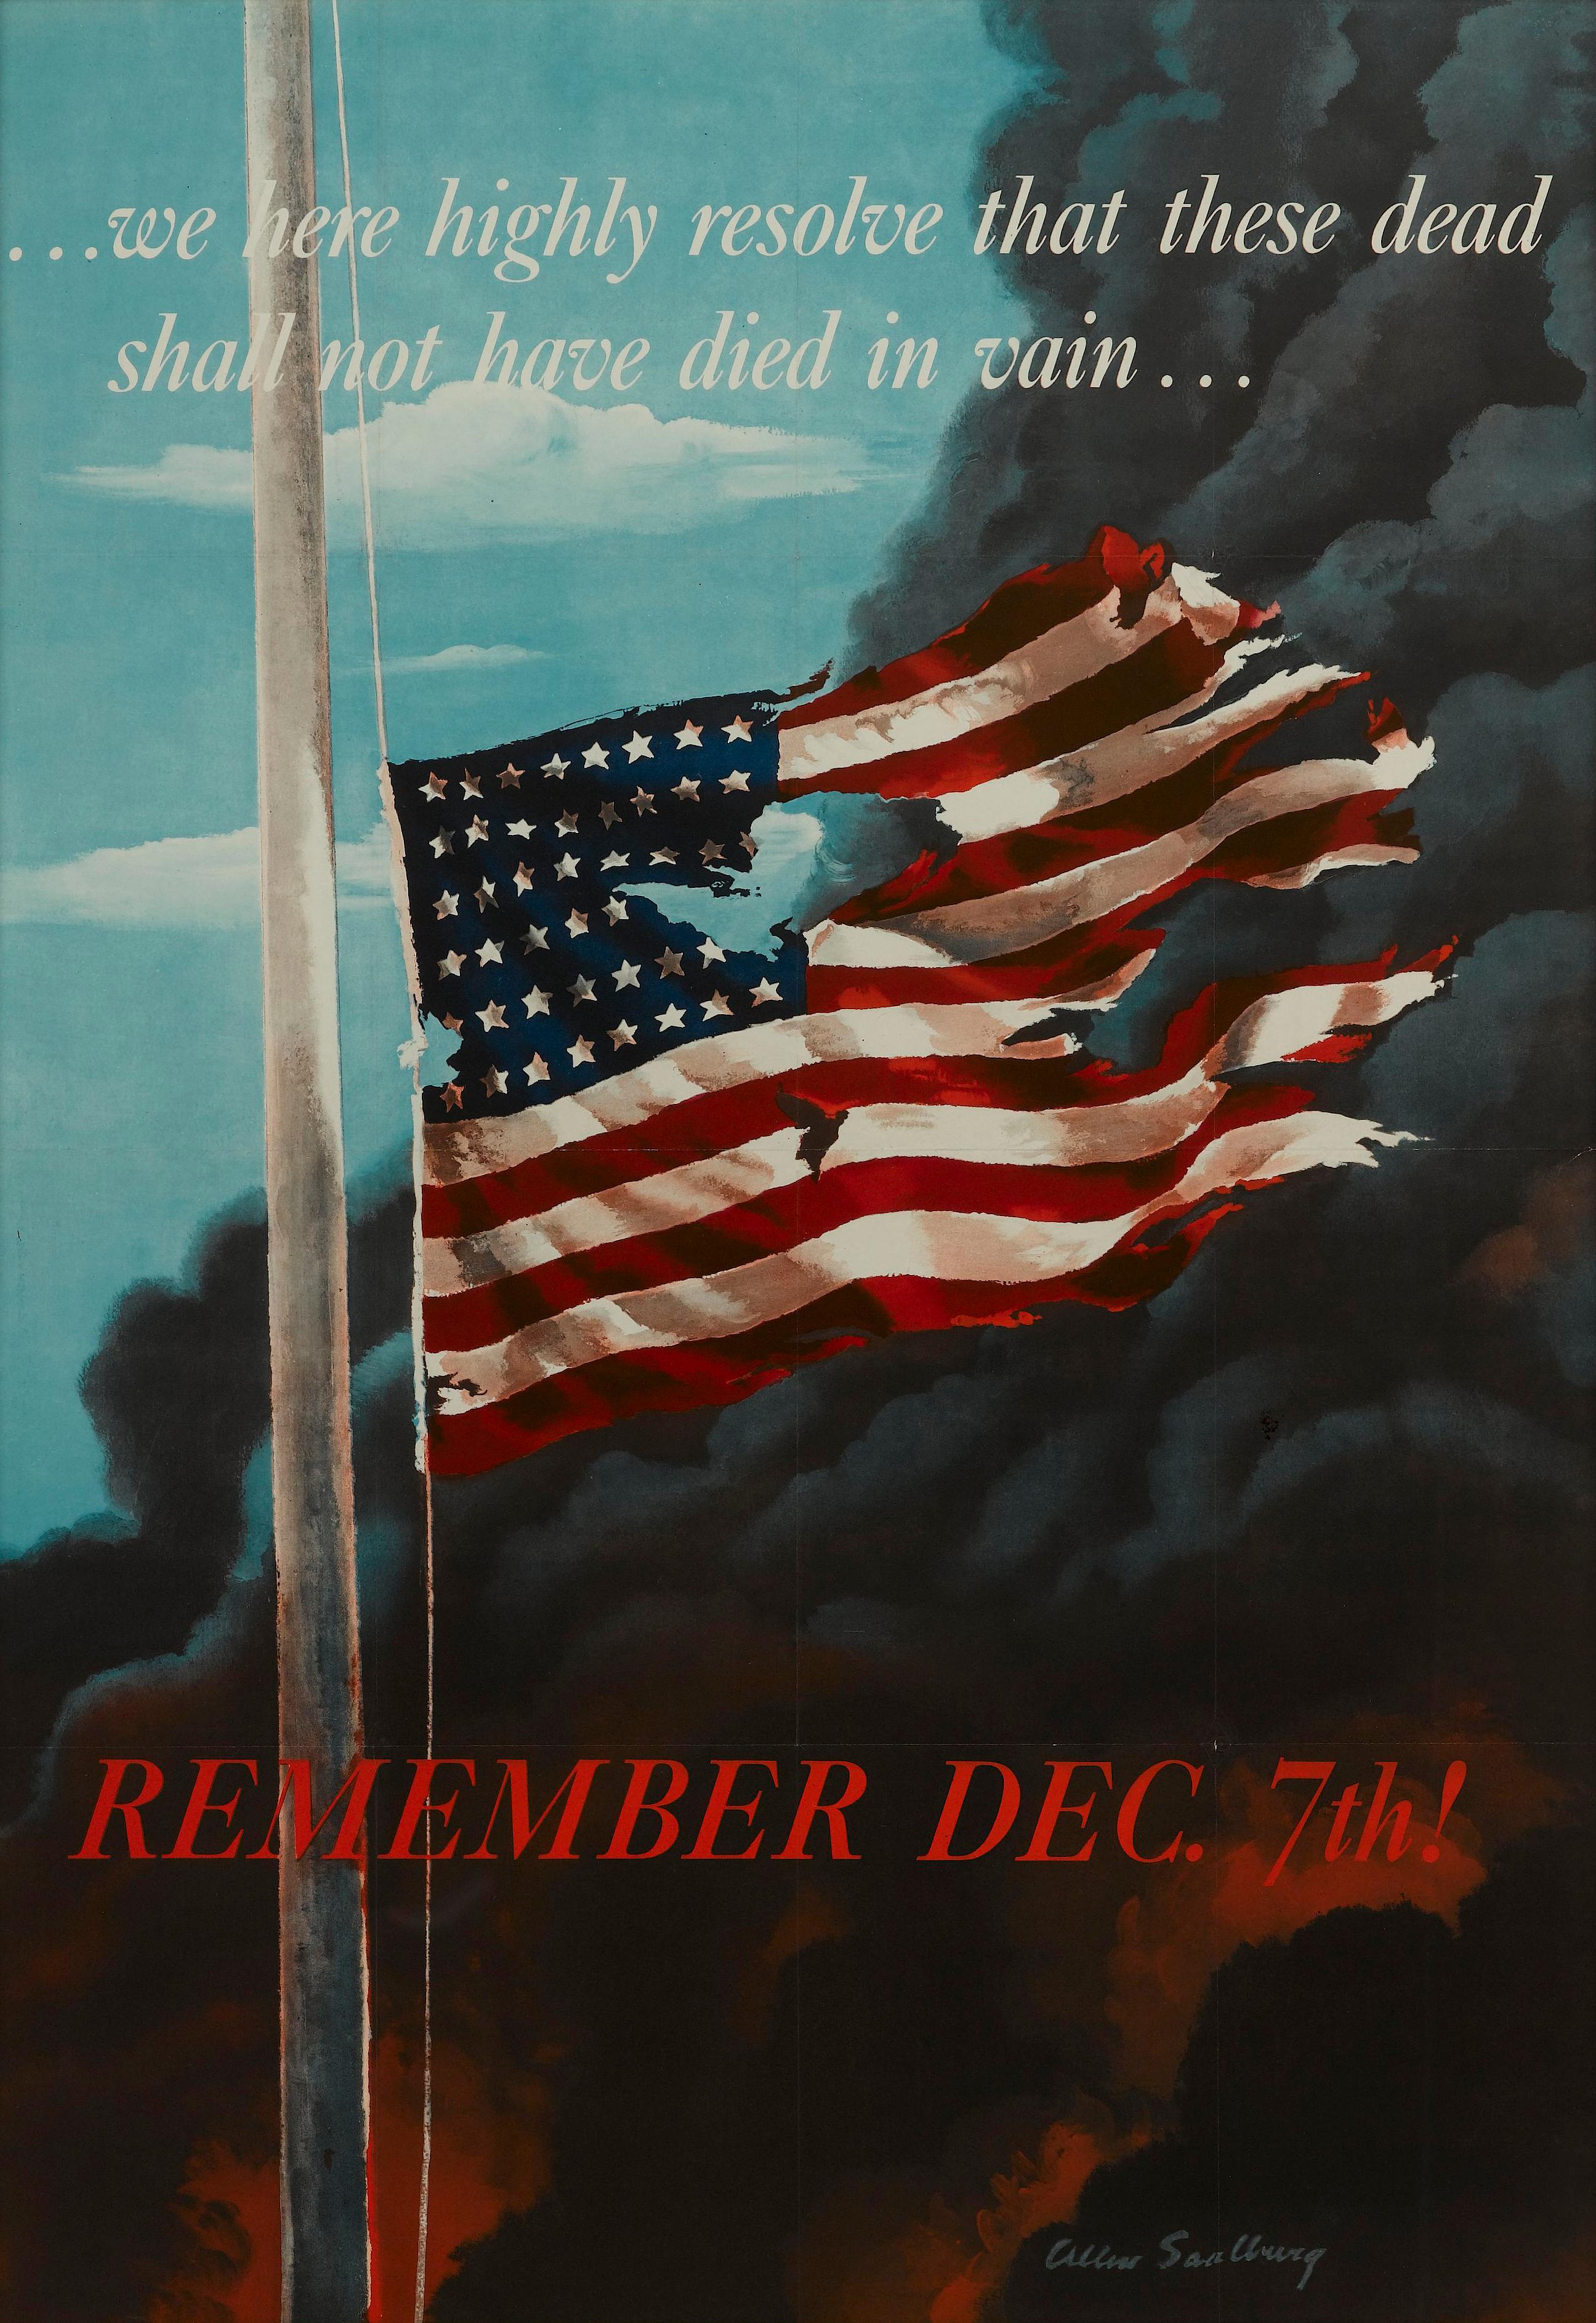 This is an original WWII poster by Allen Saalburg, published in 1942. The poster features a tattered American flag at half-mast, with billowing smoke, flames, and a partially obscured blue sky behind it. At top and bottom of the poster is red and